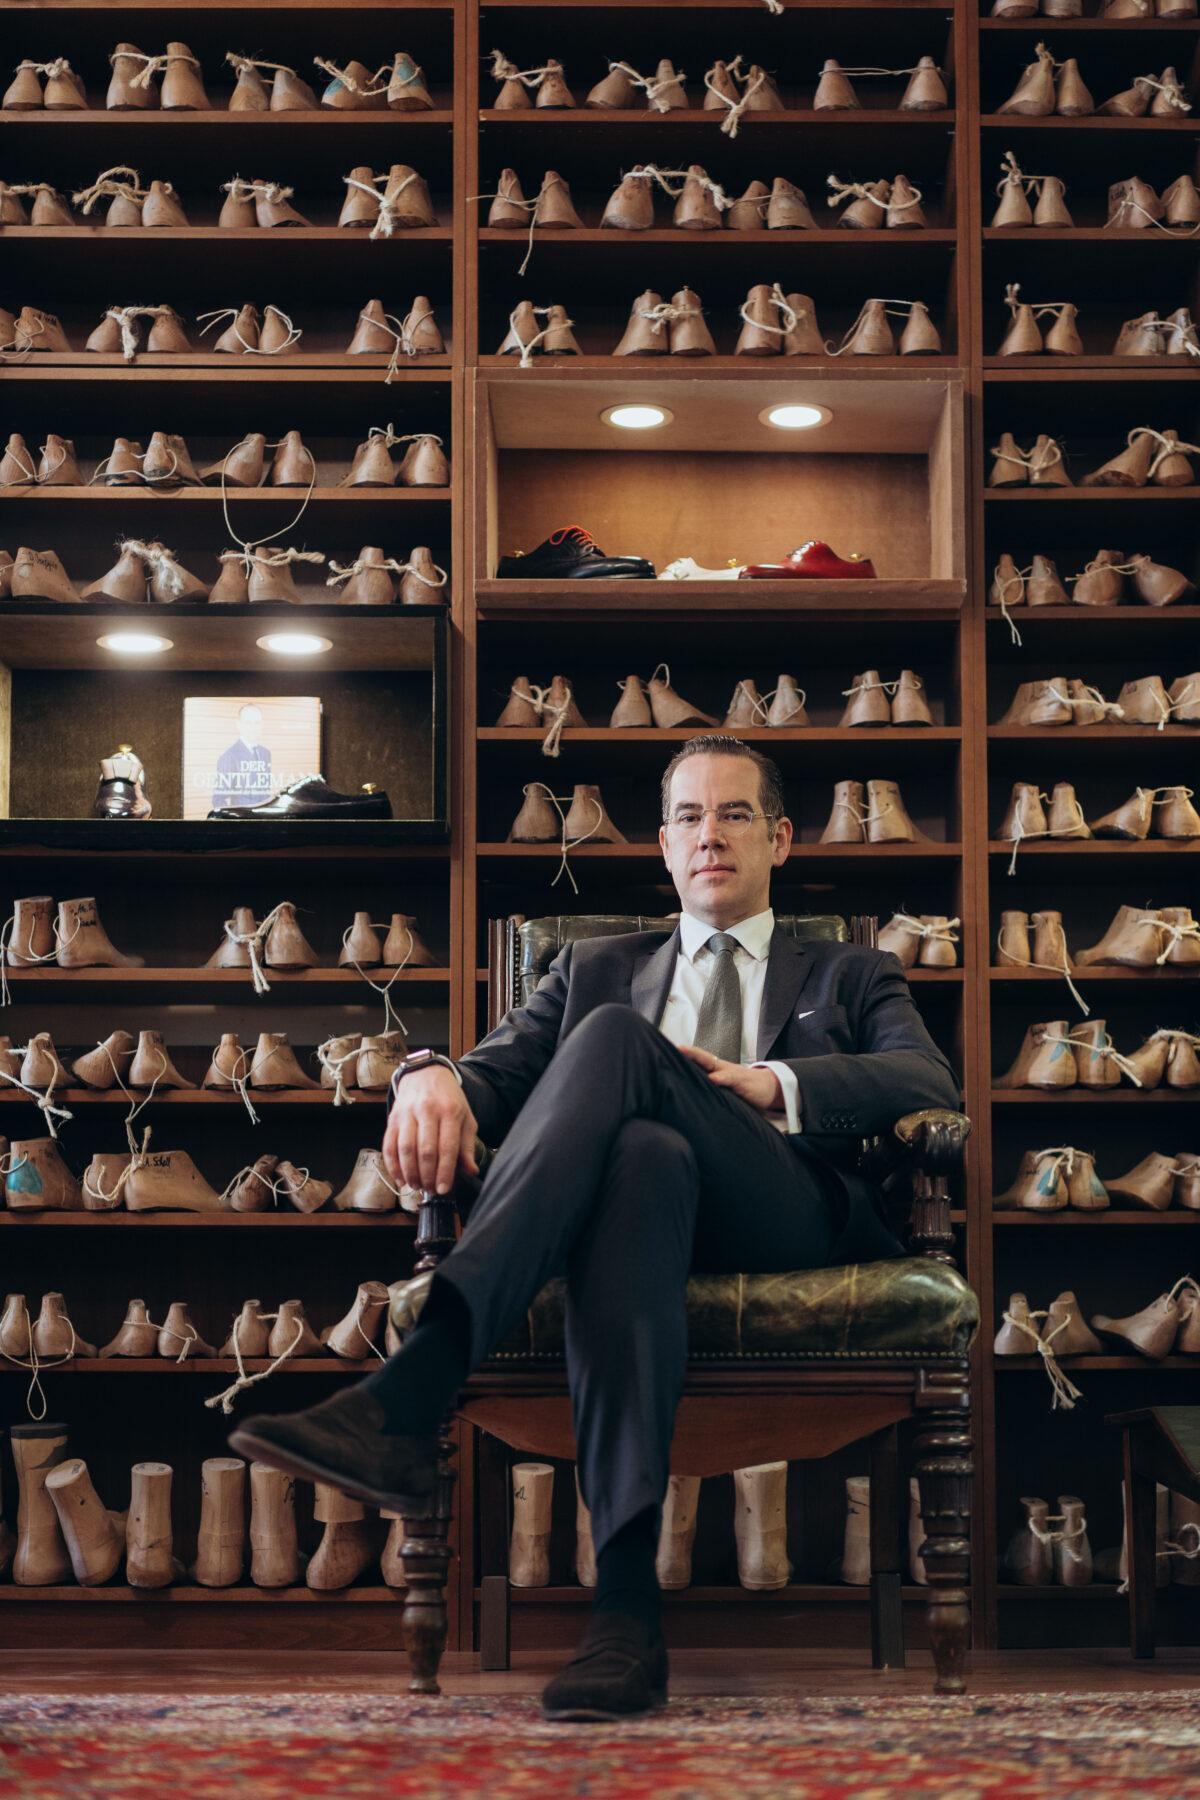 With training in both accounting and traditional shoemaking, Matthias Vickermann handles much of the business side of the company, including traveling around the world to meet clients and educate new ones.<br/>(Courtesy of Vickermann und Stoya)